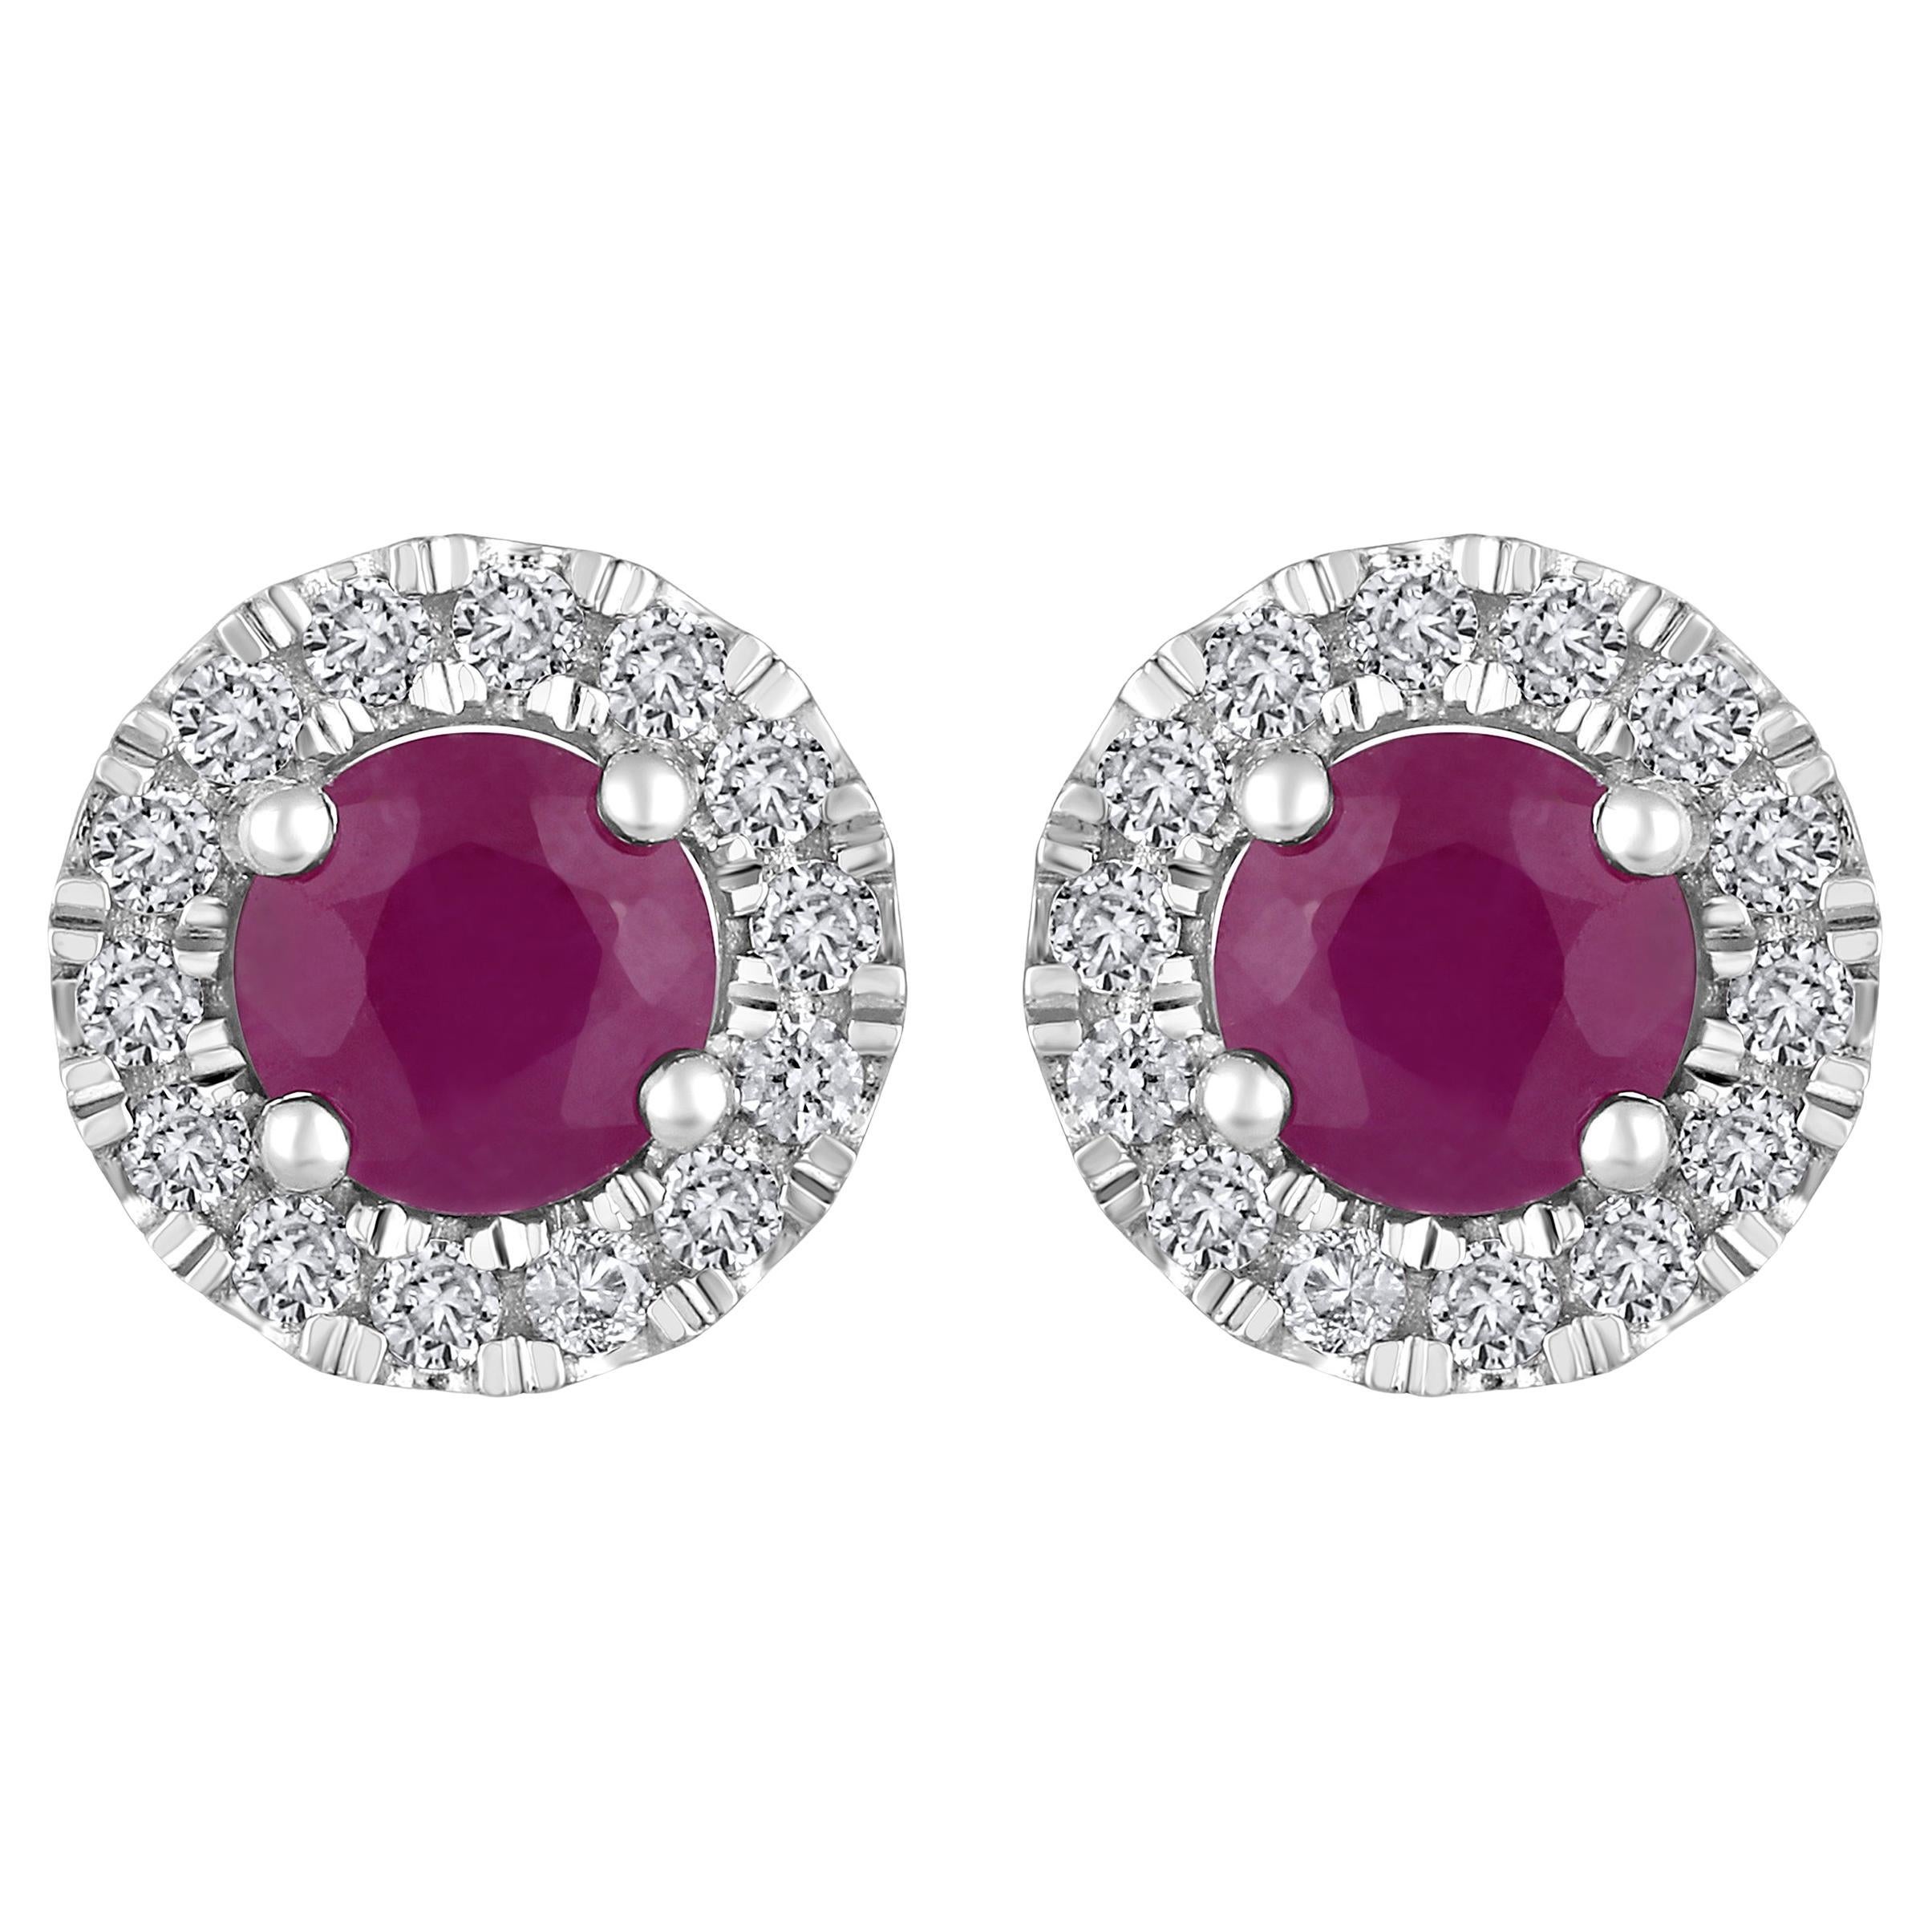 Certified 14K Gold 1.14ct Natural Diamond w/ Ruby Round Halo Stud Earrings